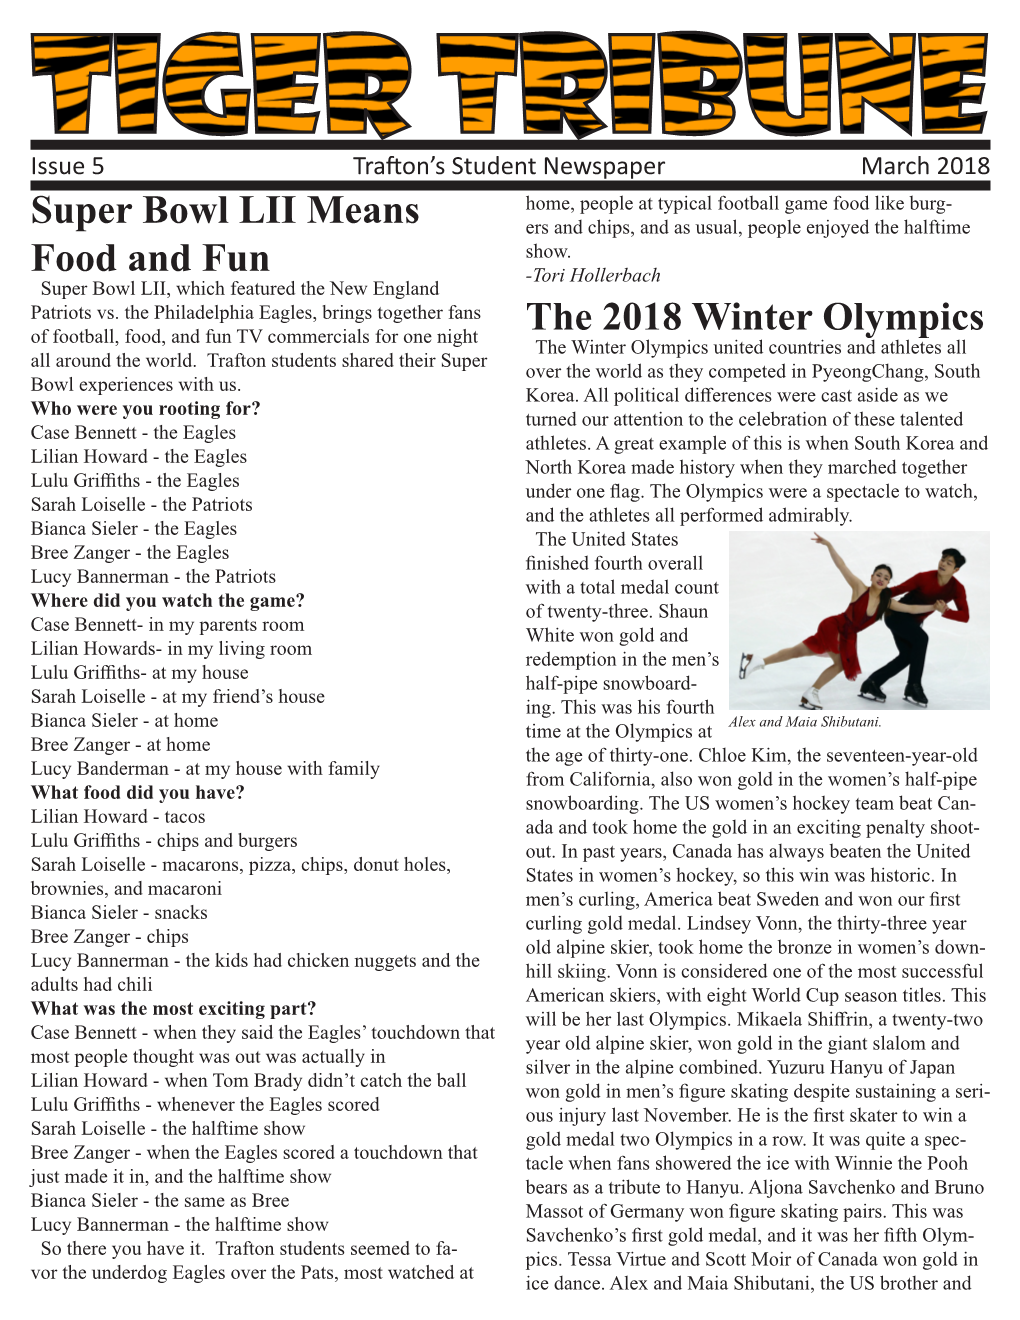 Super Bowl LII Means Food and Fun the 2018 Winter Olympics